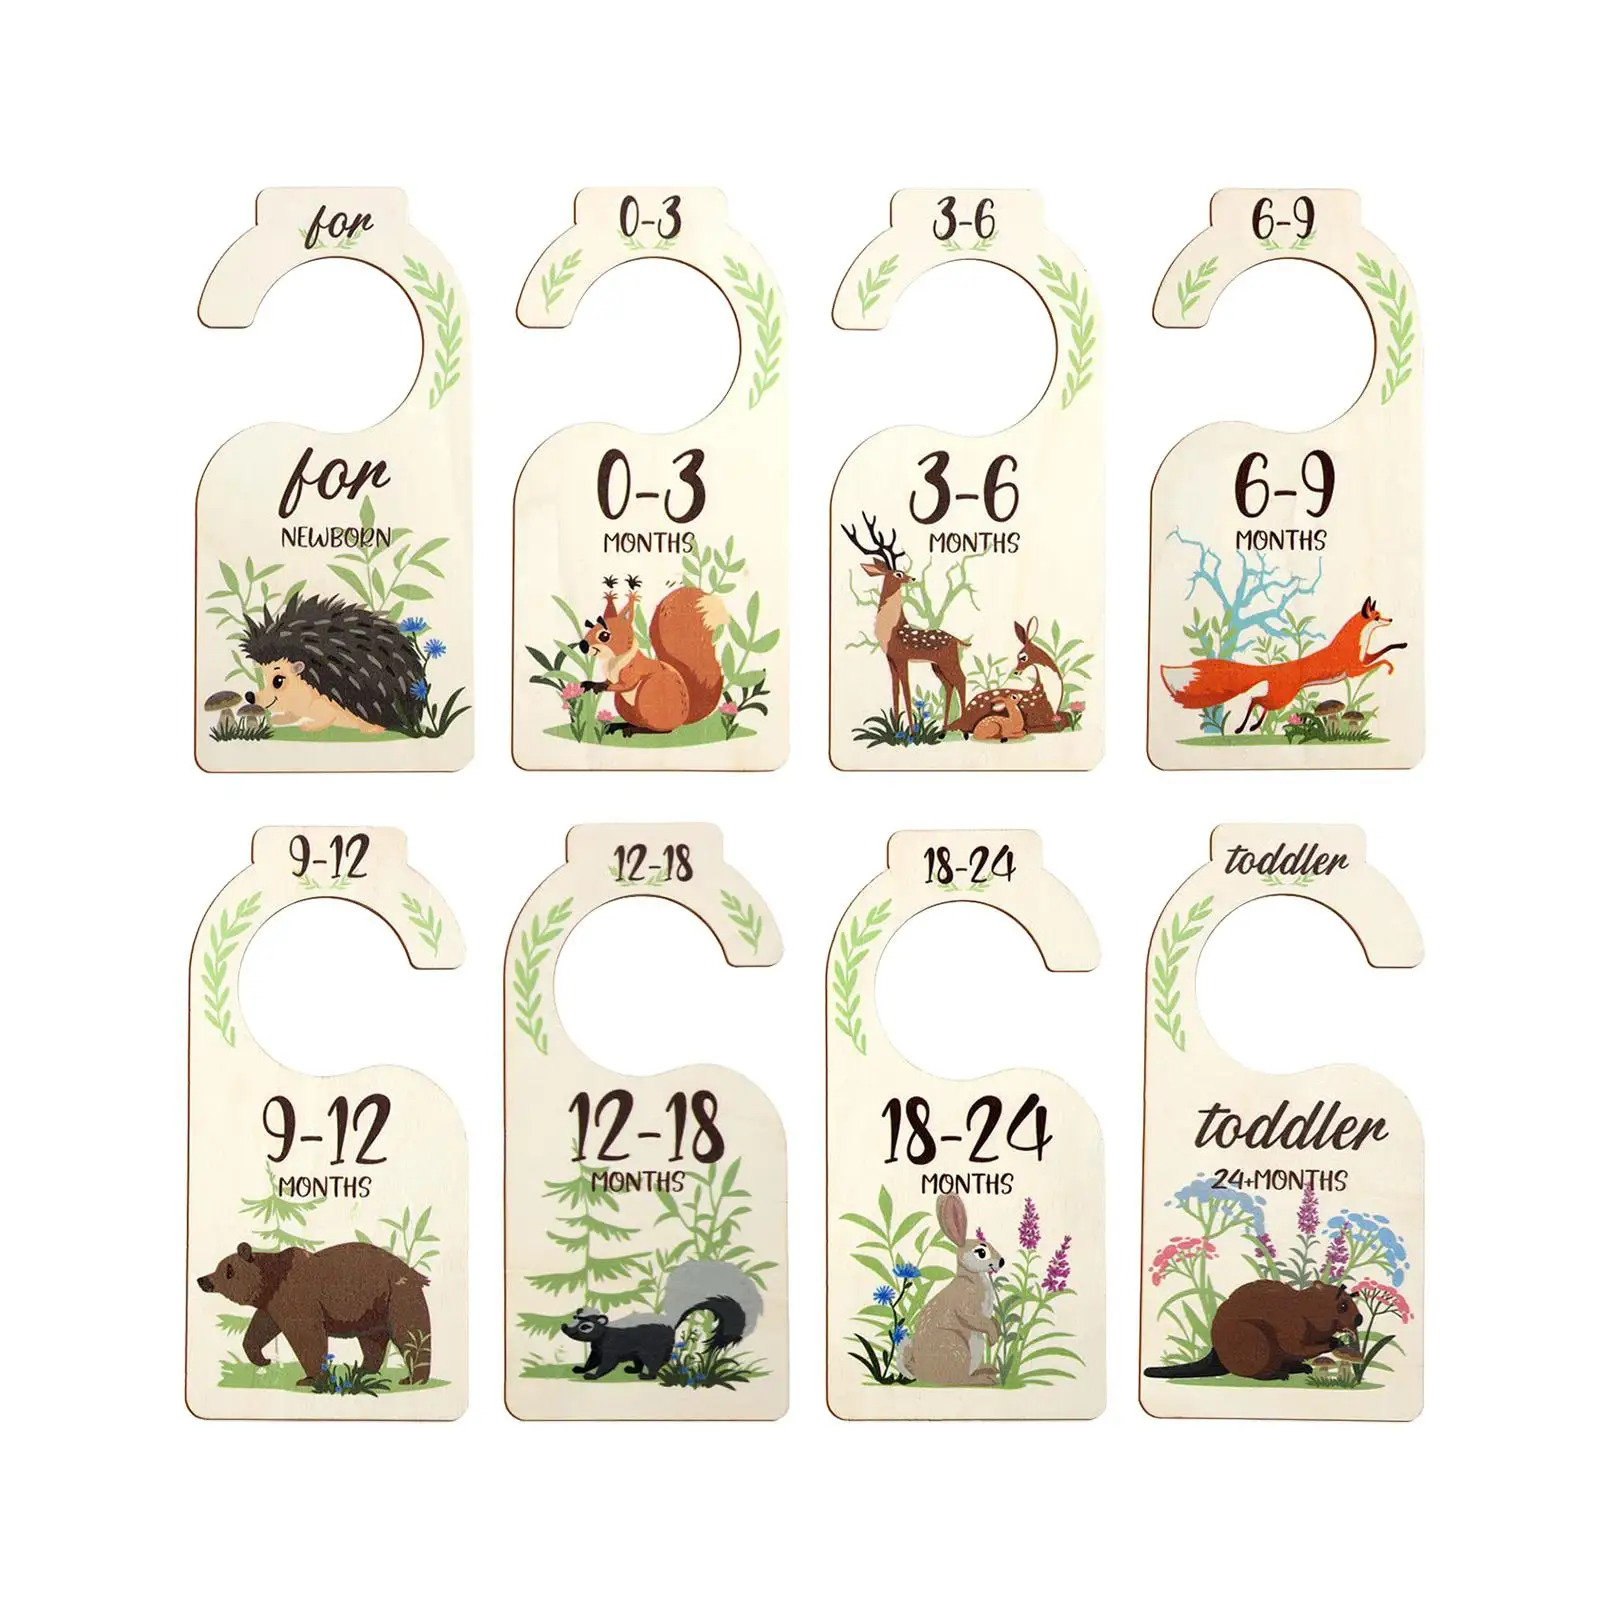 8 Pieces Baby Closet Dividers Baby Clothing Size Age Dividers Wood from Newborn to 24 Months for Home Wardrobe Bedroom Babies